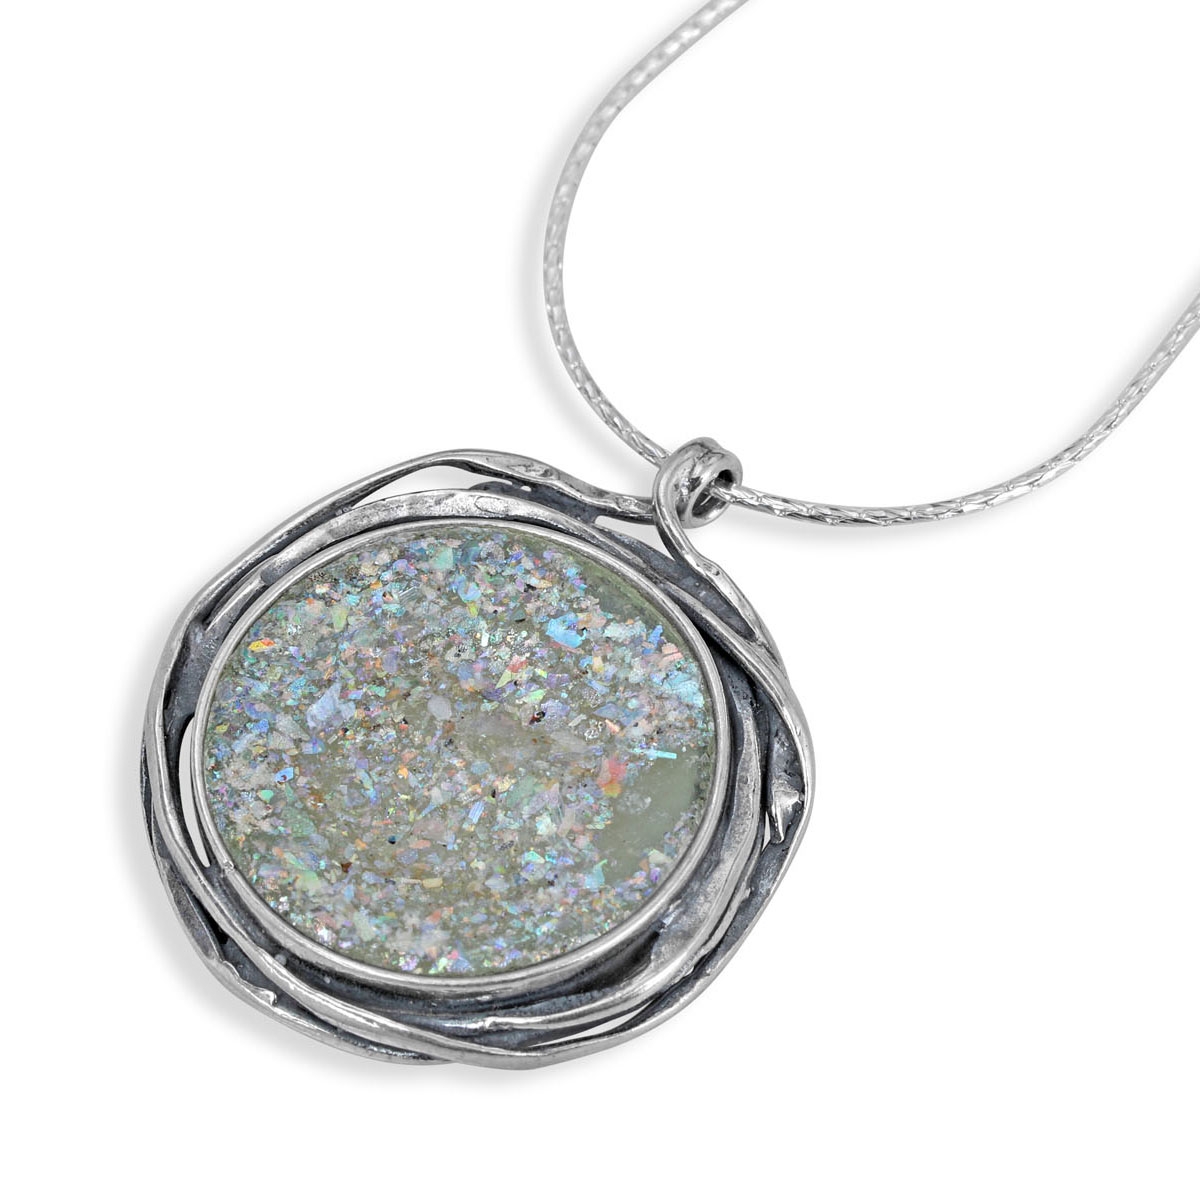 Moriah Jewelry Round Roman Glass and 925 Sterling Silver Necklace  - 1